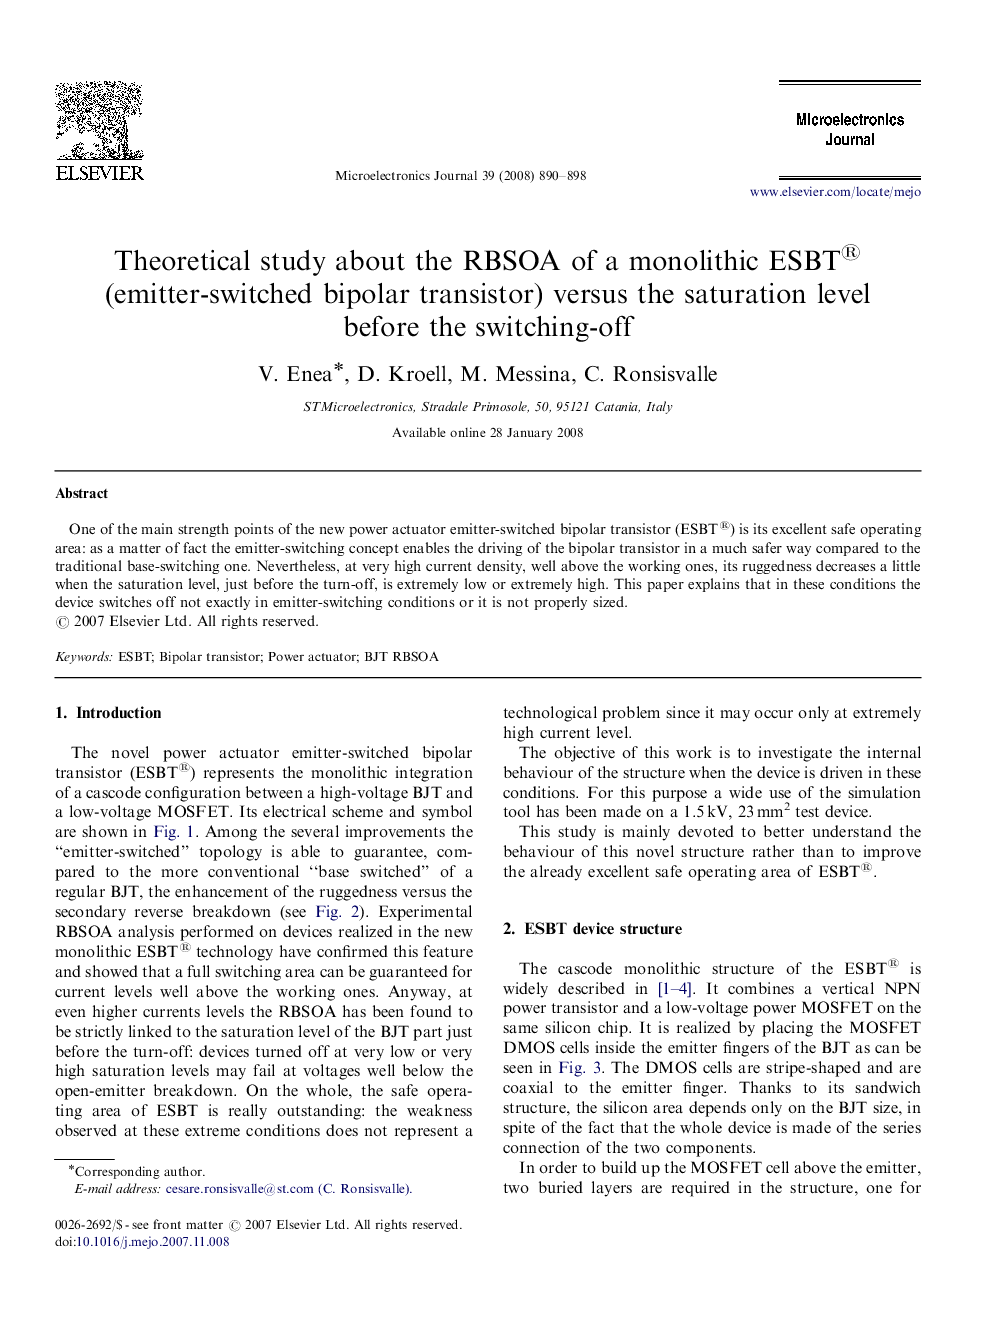 Theoretical study about the RBSOA of a monolithic ESBT® (emitter-switched bipolar transistor) versus the saturation level before the switching-off